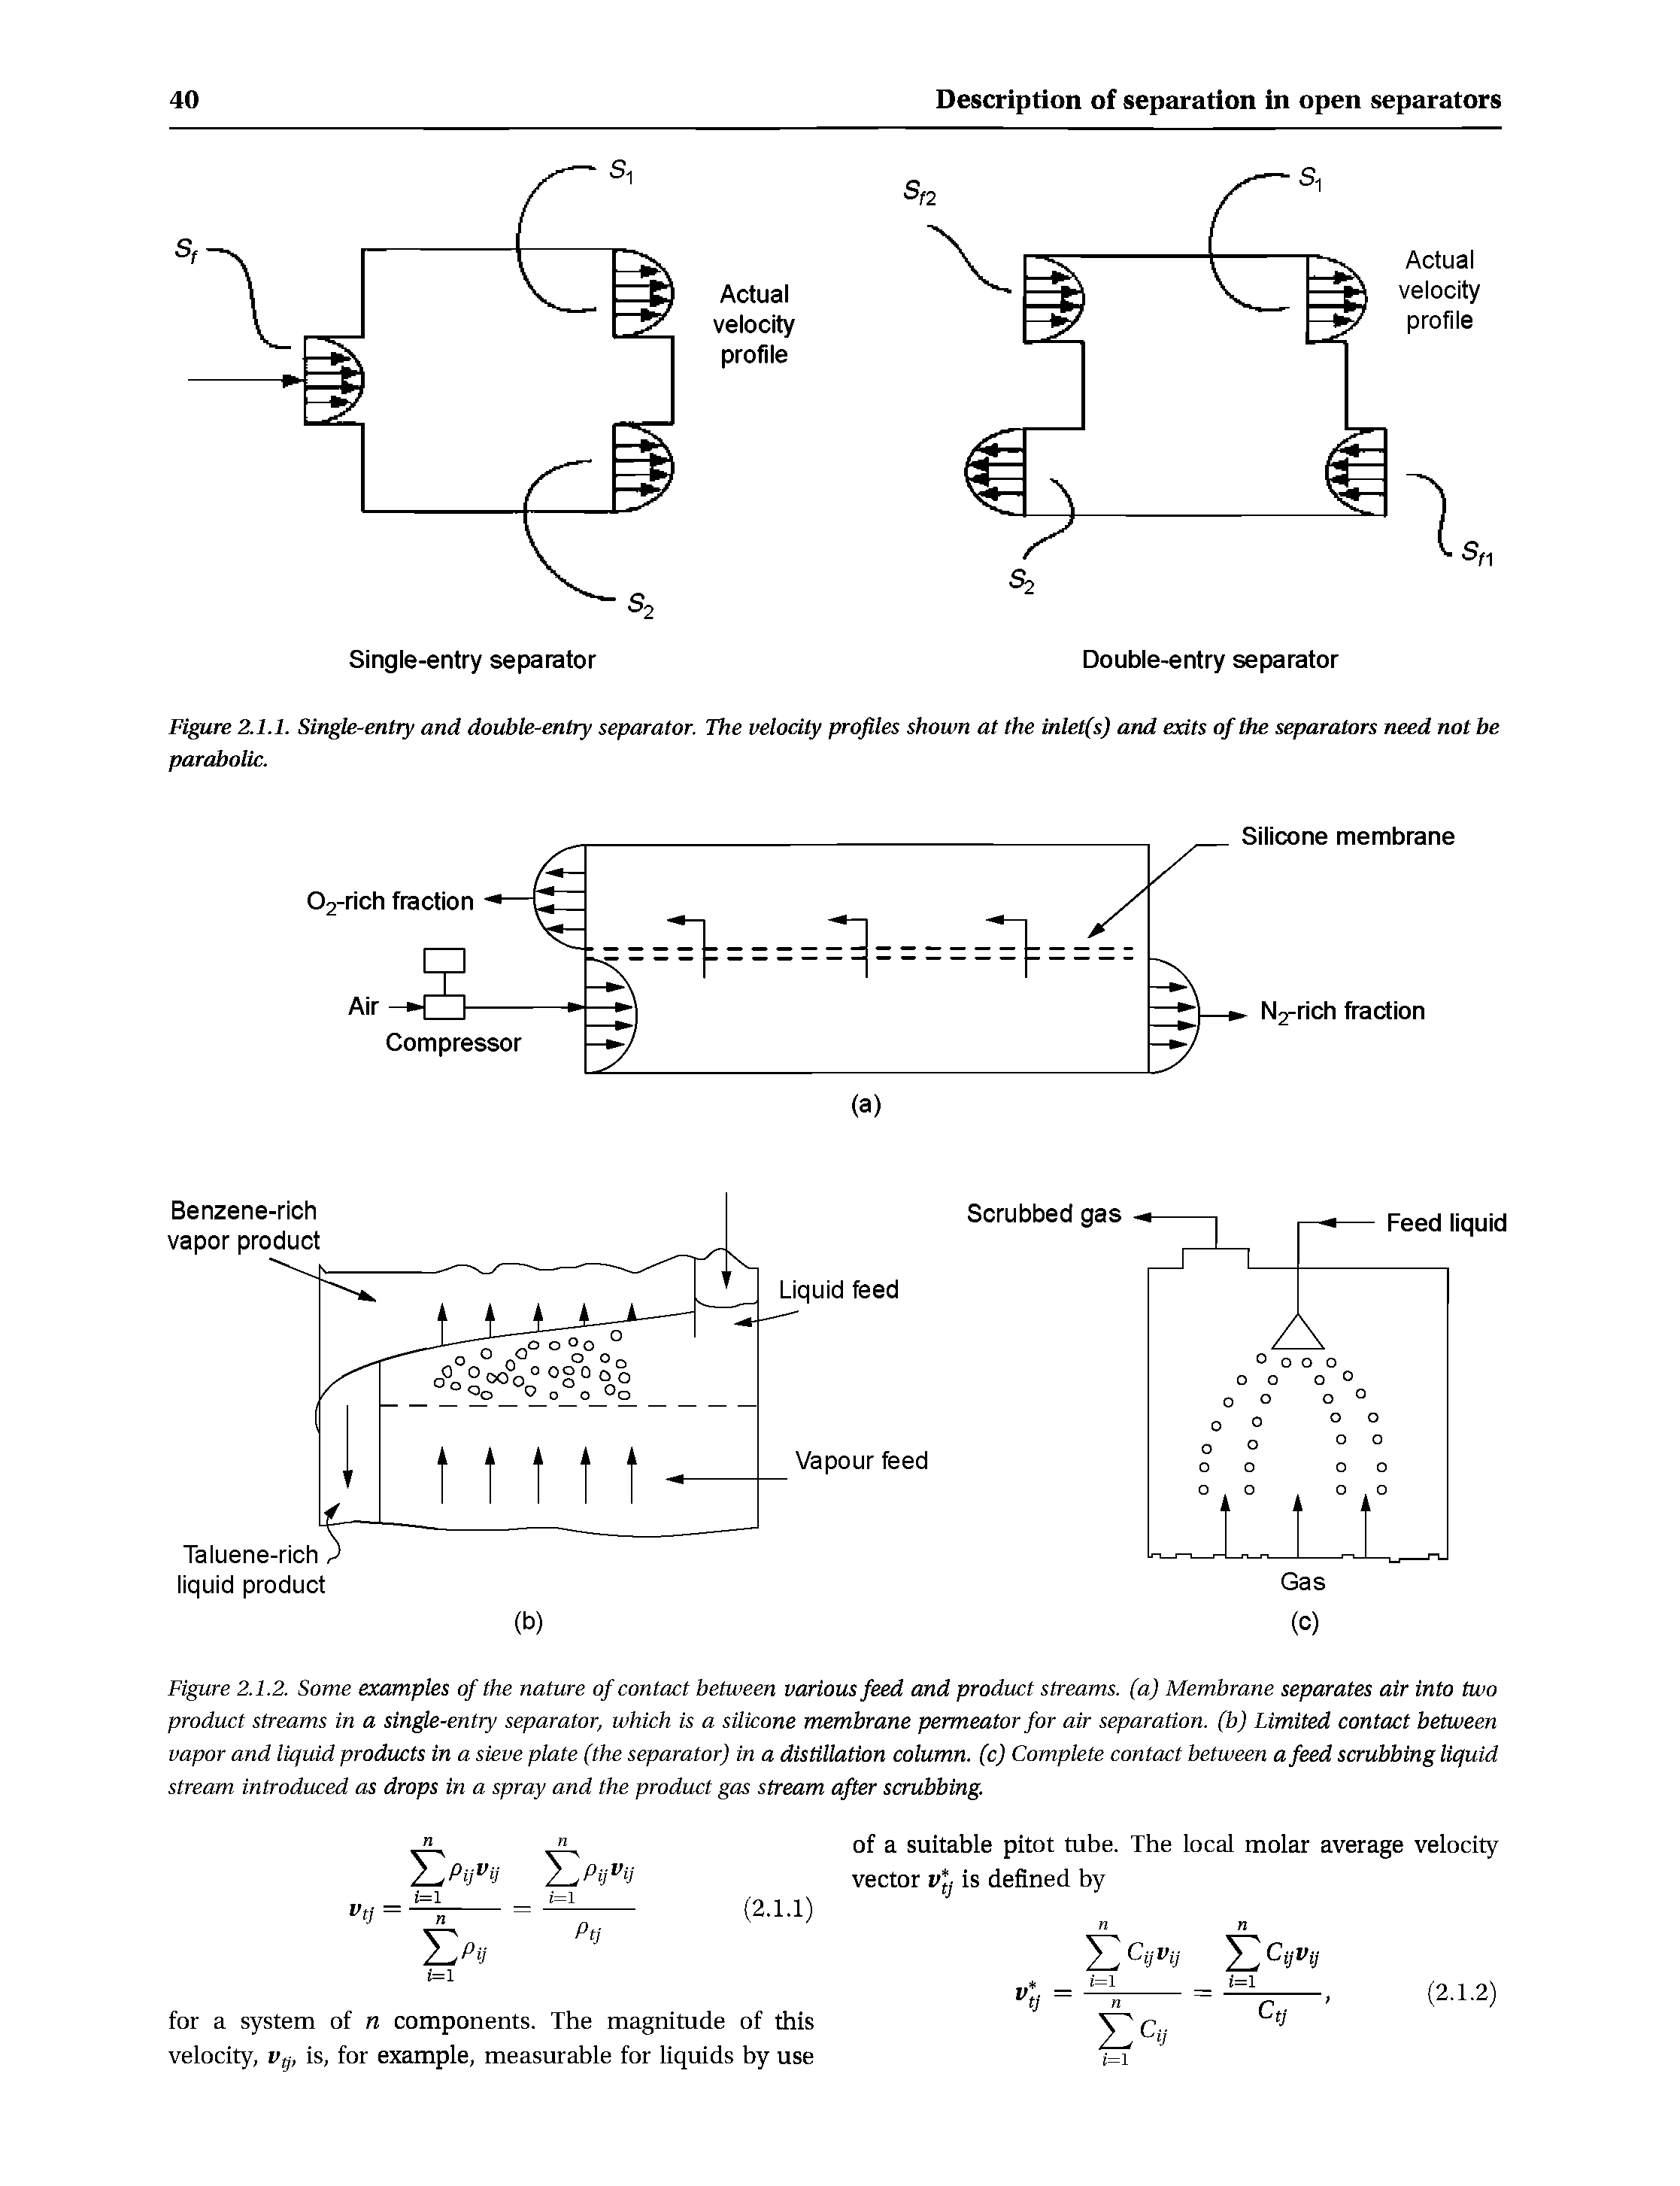 Figure 2.1.2. Some examples of the nature of contact between various feed and product streams, (a) Membrane separates air into two product streams in a single-entry separator, which is a silicone membrane permeator for air separation, (b) Limited contact between vapor and liquid products in a sieve plate (the separator) in a distillation column, (c) Complete contact between a feed scrubbing liquid stream introduced as drops in a spray and the product gas stream after scrubbing.